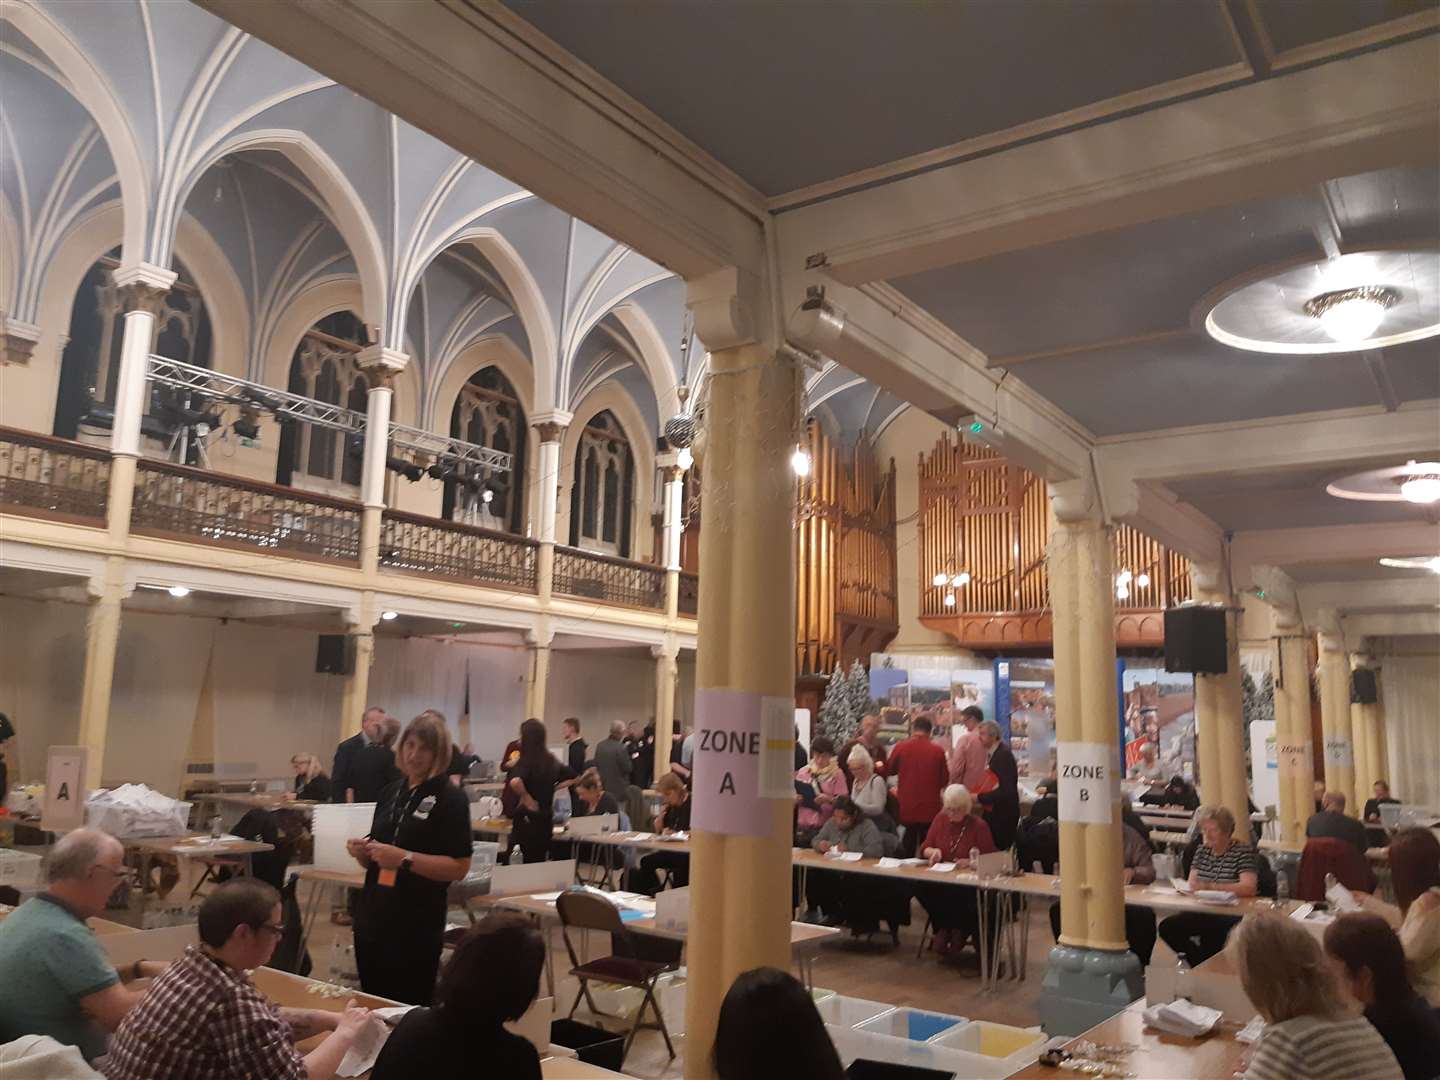 The count for the 2019 General Election inside Dover Town Hall